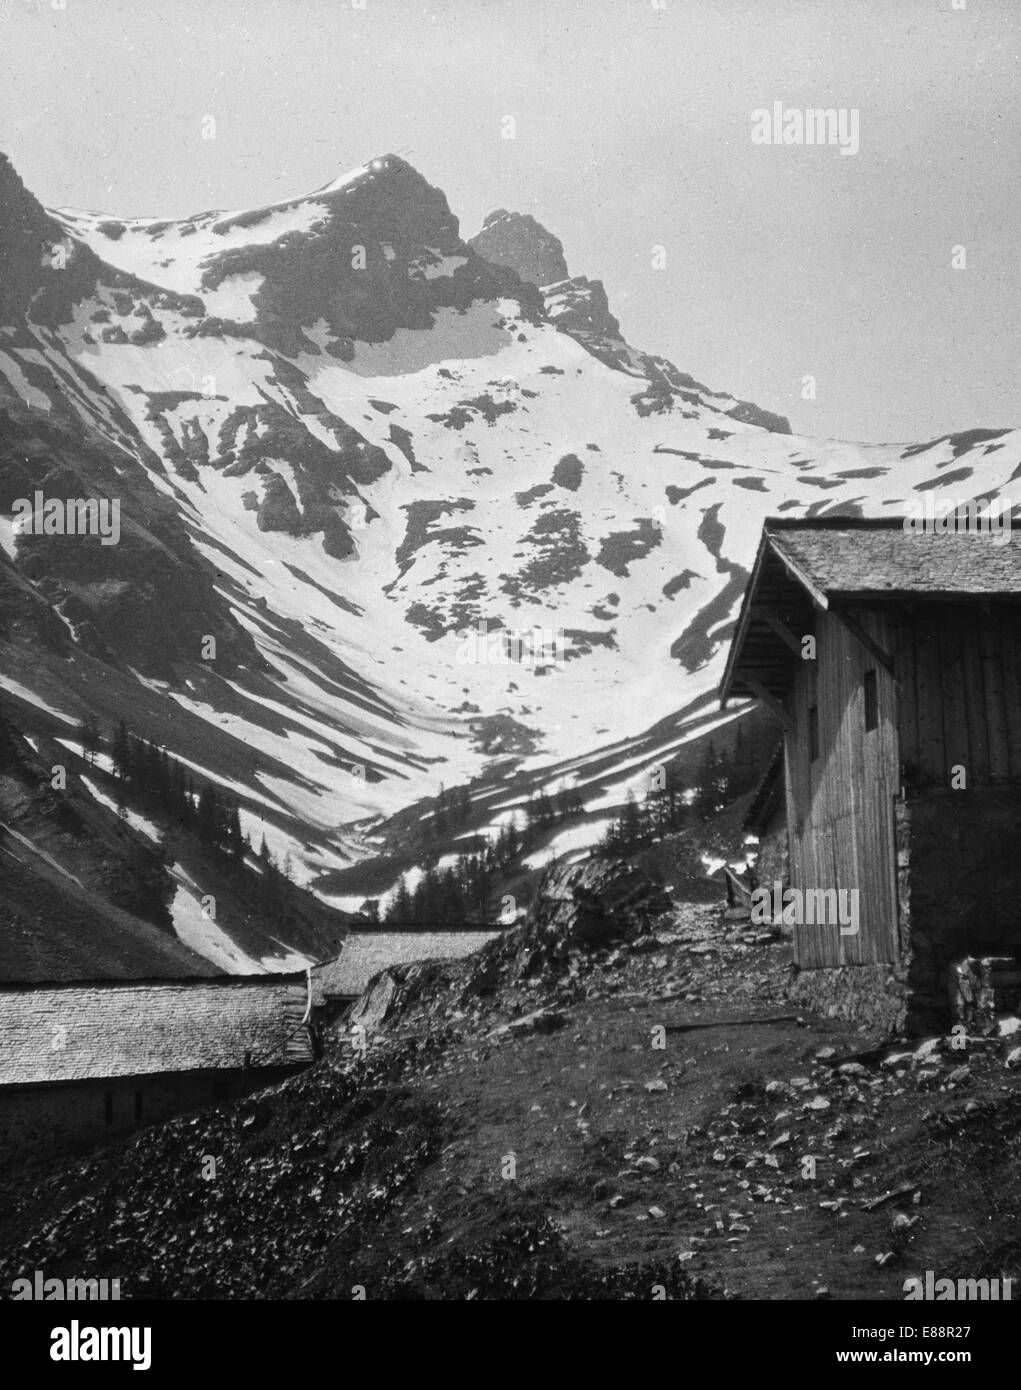 Les Dents de Marcles from the direction of the Croix de Javernaz. 1912. Reproduced from a glass lantern slide. Stock Photo